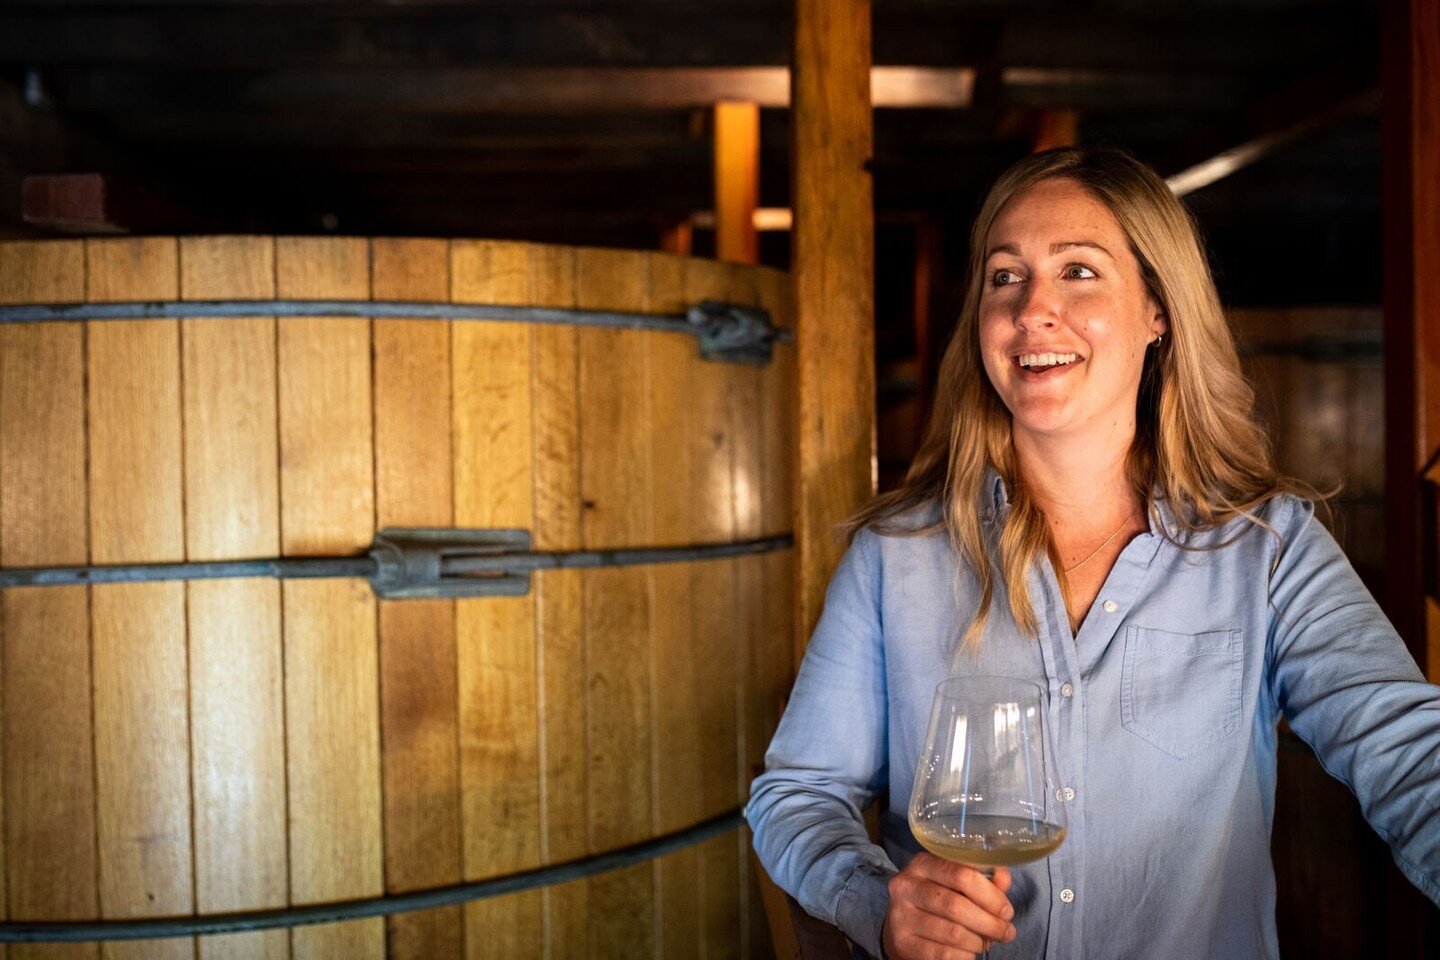 We're popping bottles and celebrating the fabulous Brittany, the mastermind behind the amazing sips at Brendel for International Women&rsquo;s Day!⁠
⁠
Brittany brings a burst of flavor to every glass with her passion for organic farming and winemakin